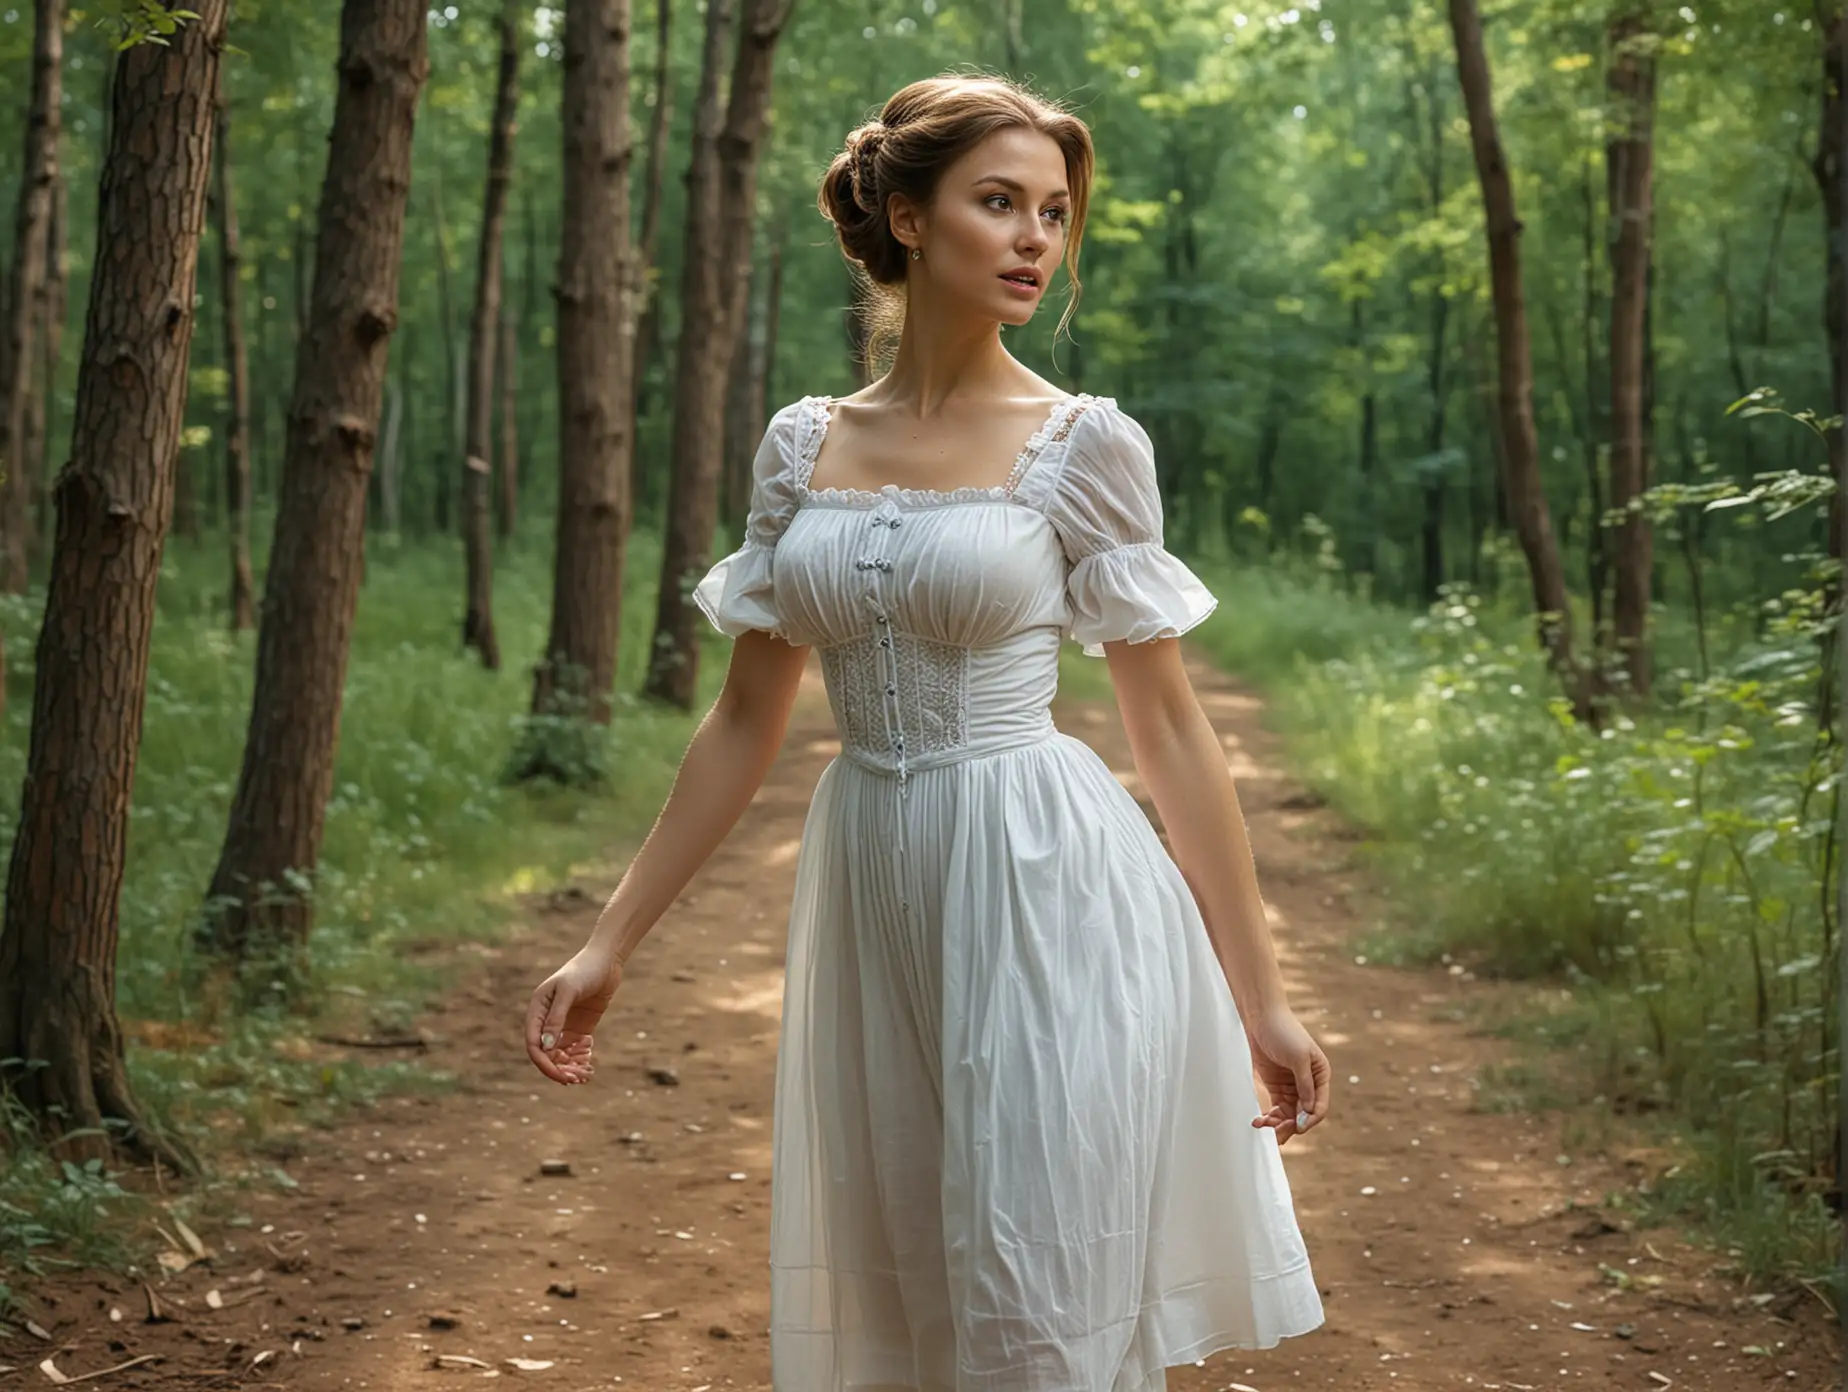 Elegant-19th-Century-Russian-Woman-Strolling-in-Summer-Forest-with-Friend